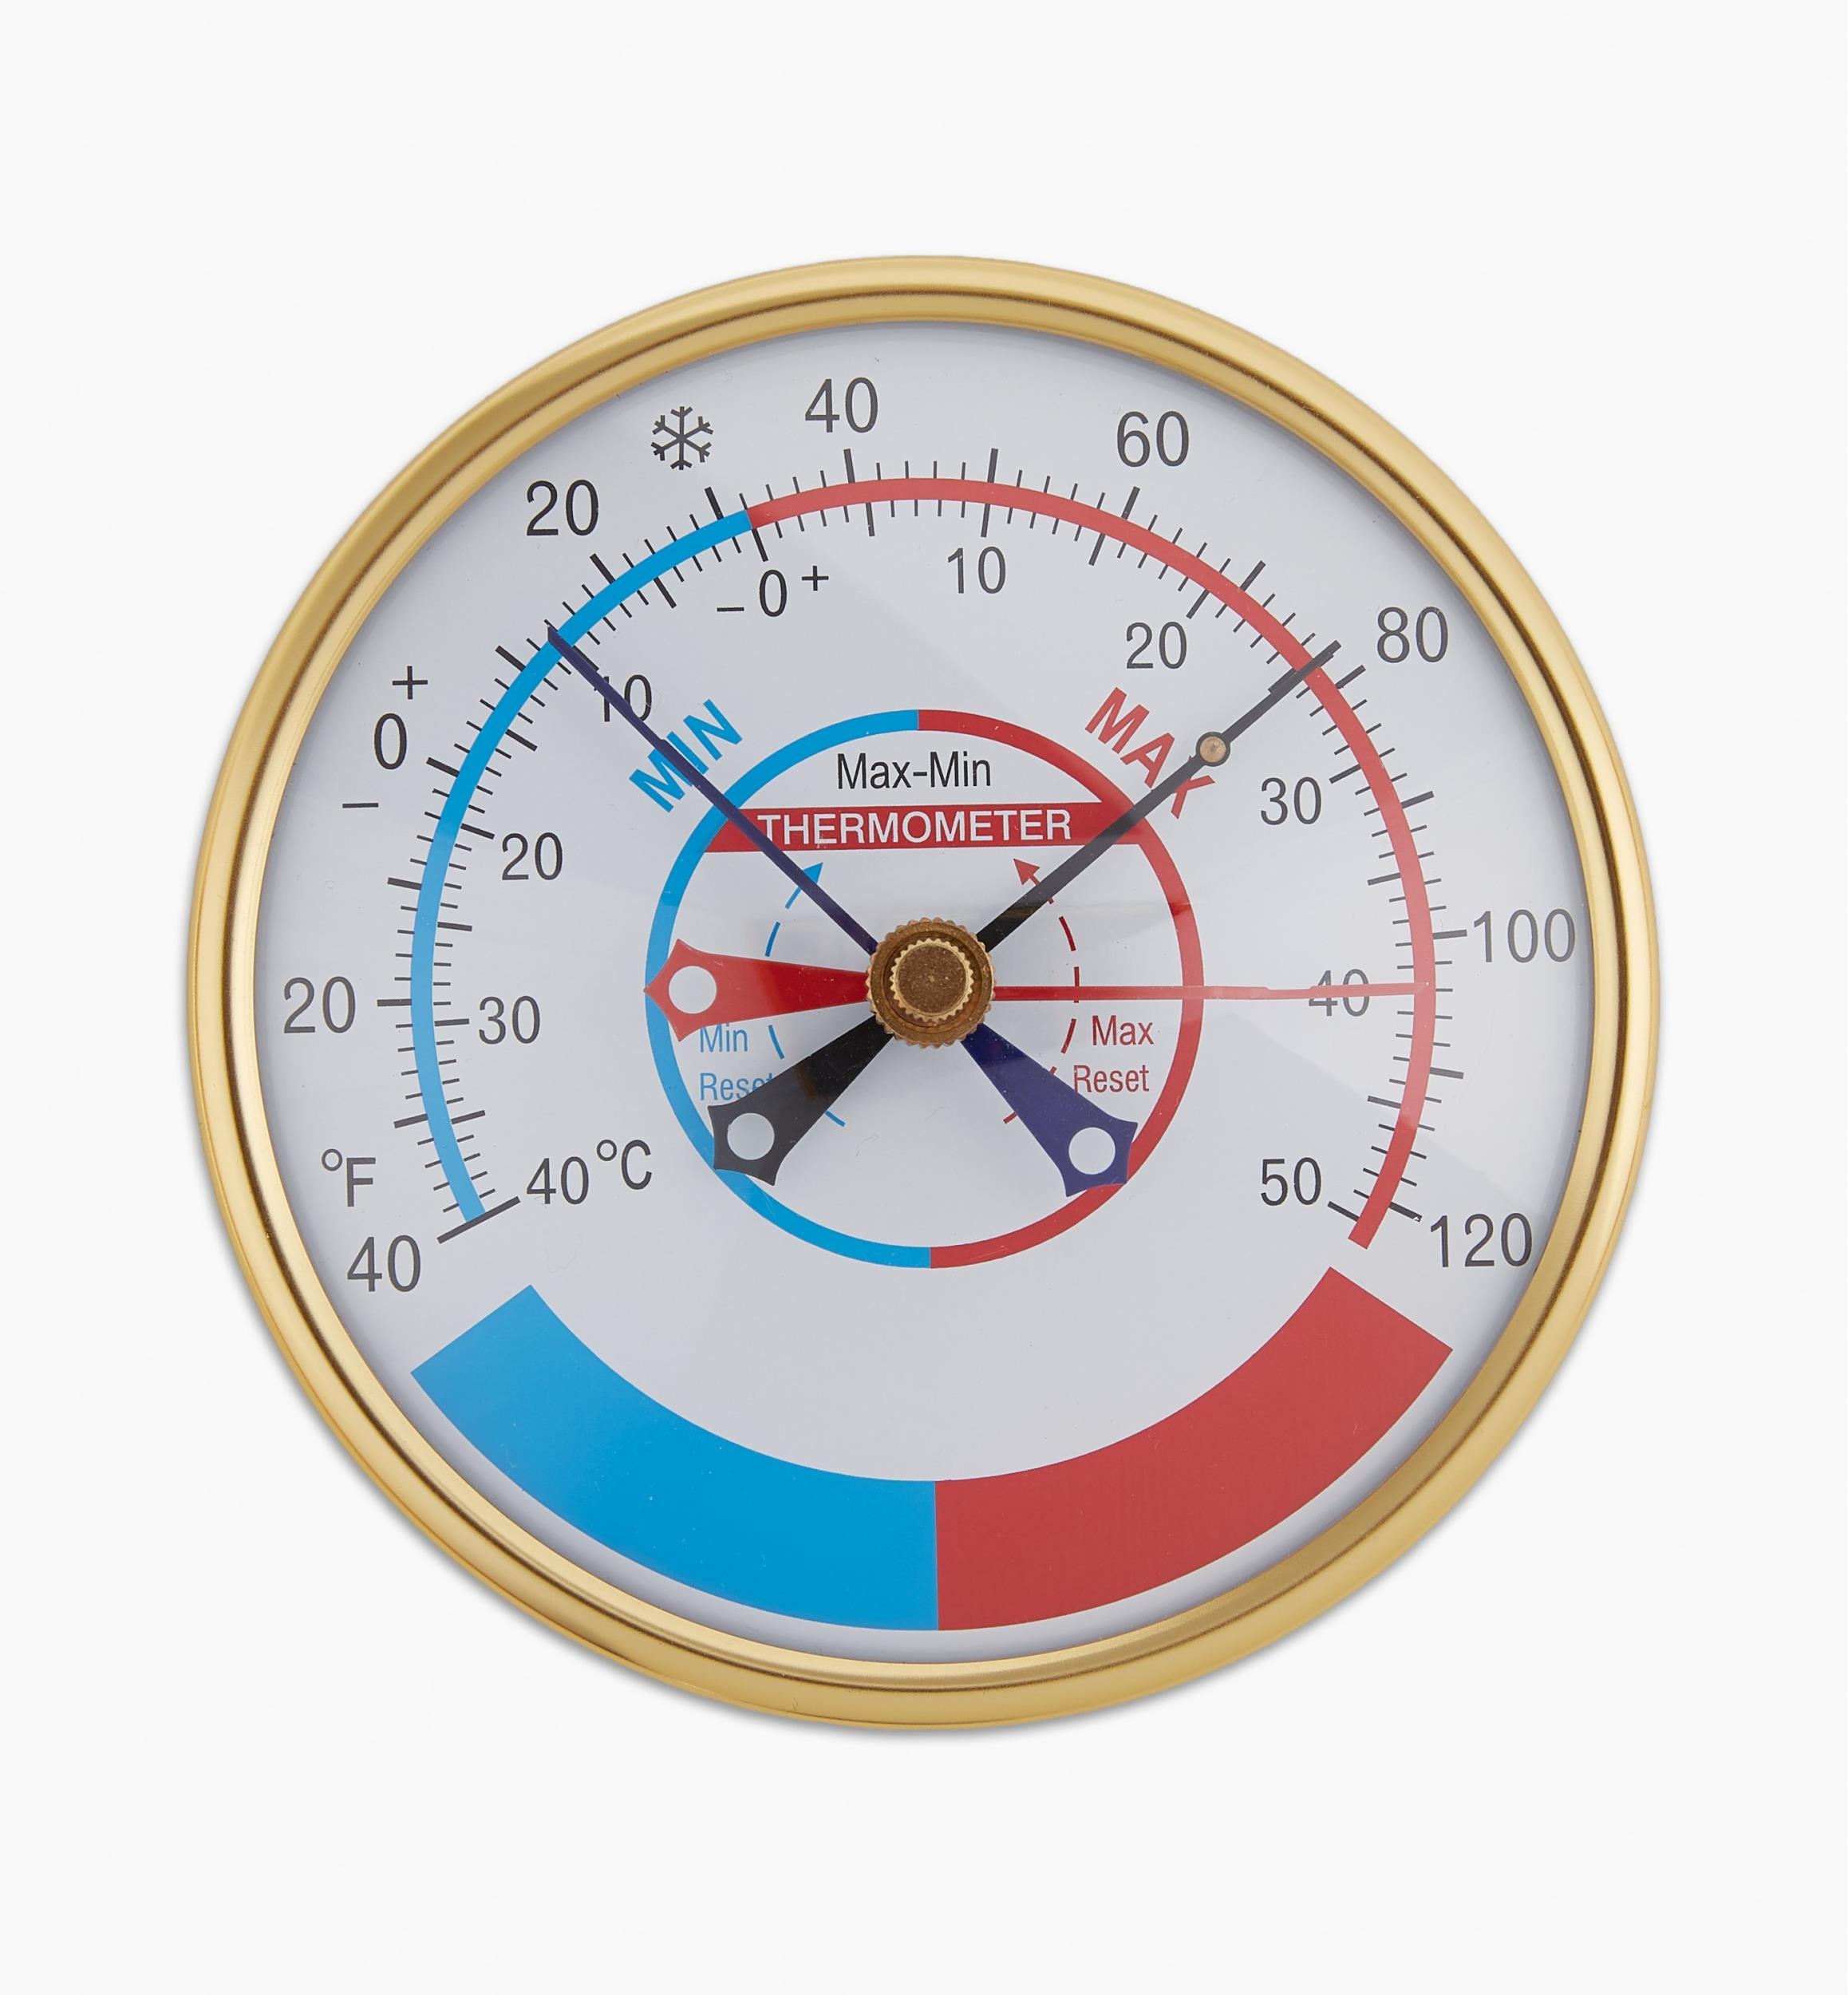 Min Max Thermometer In Outdoor Thermometers for sale